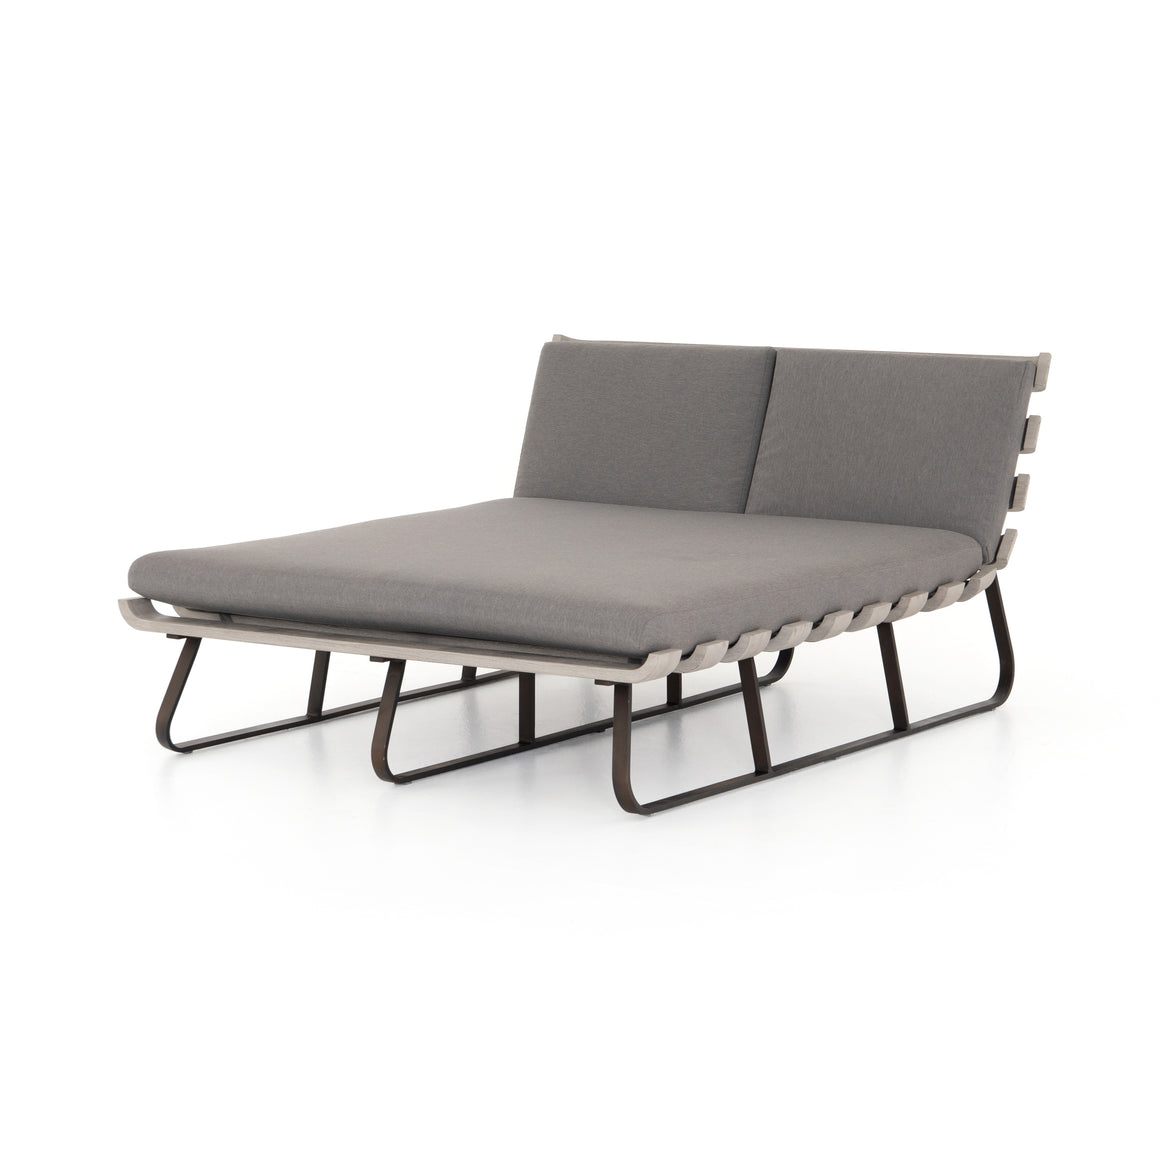 DIMITRI OUTDOOR DOUBLE CHAISE-CHARCOAL